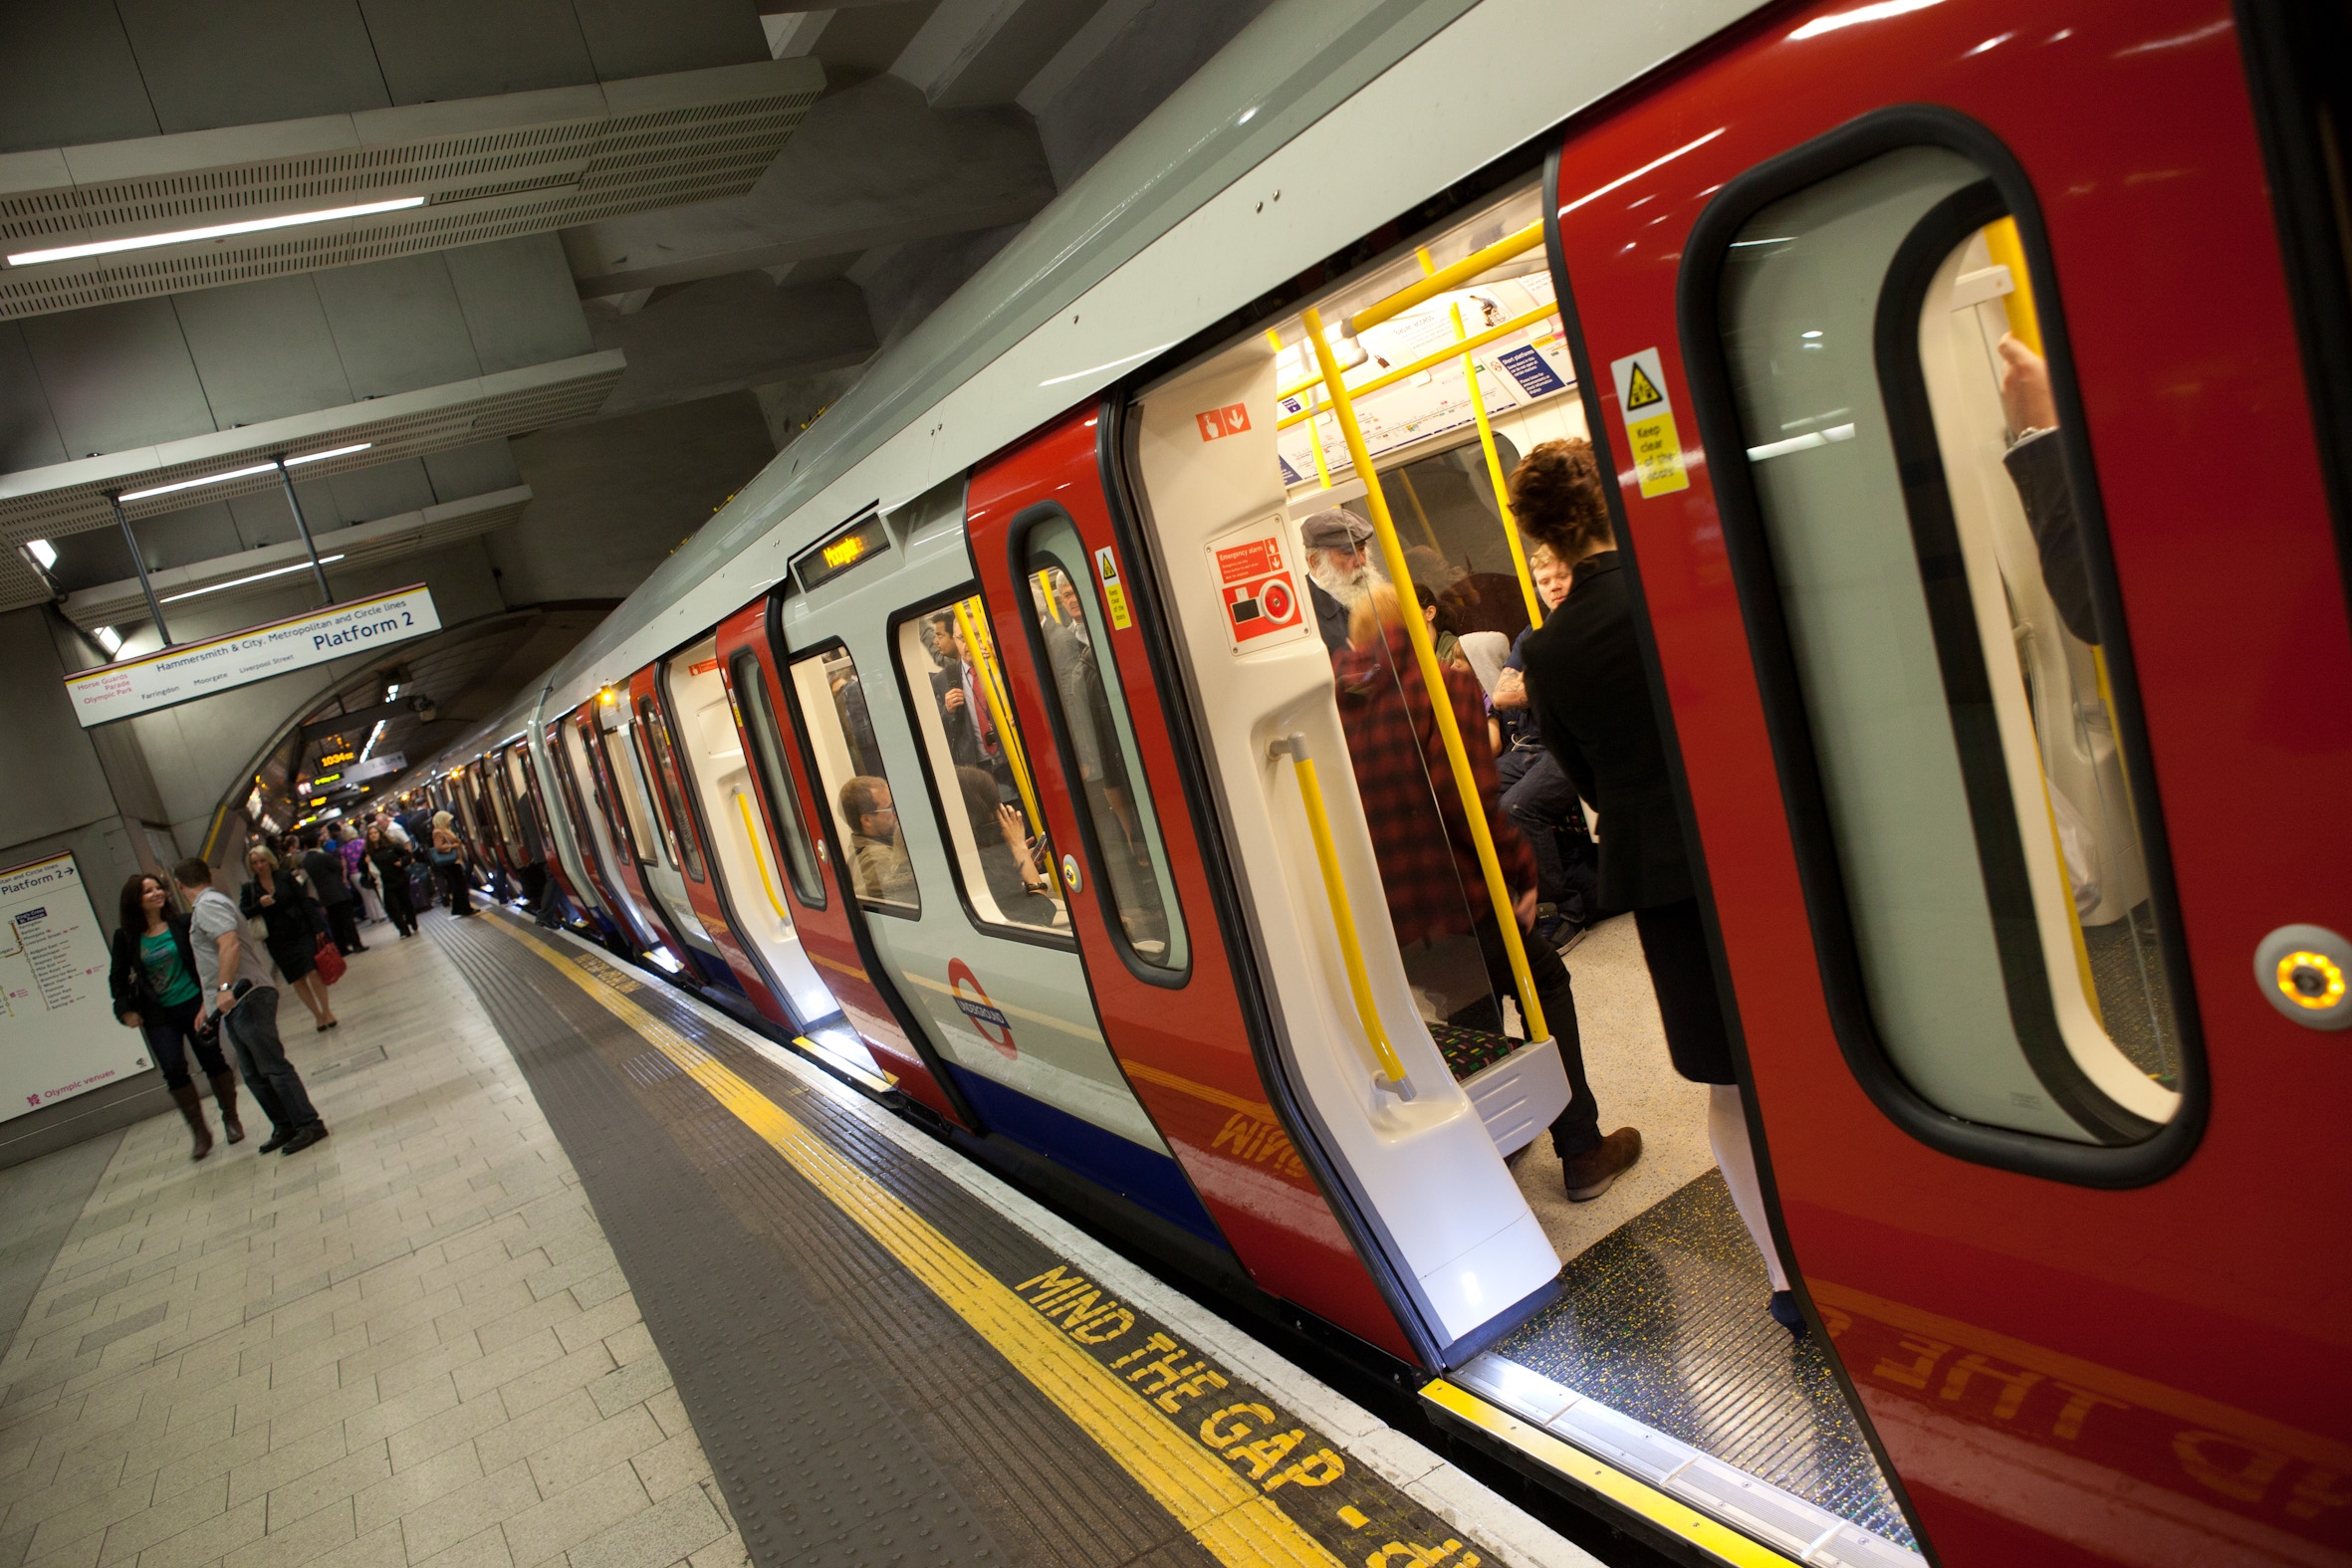 London Underground train at the platform with doors open ready to depart 